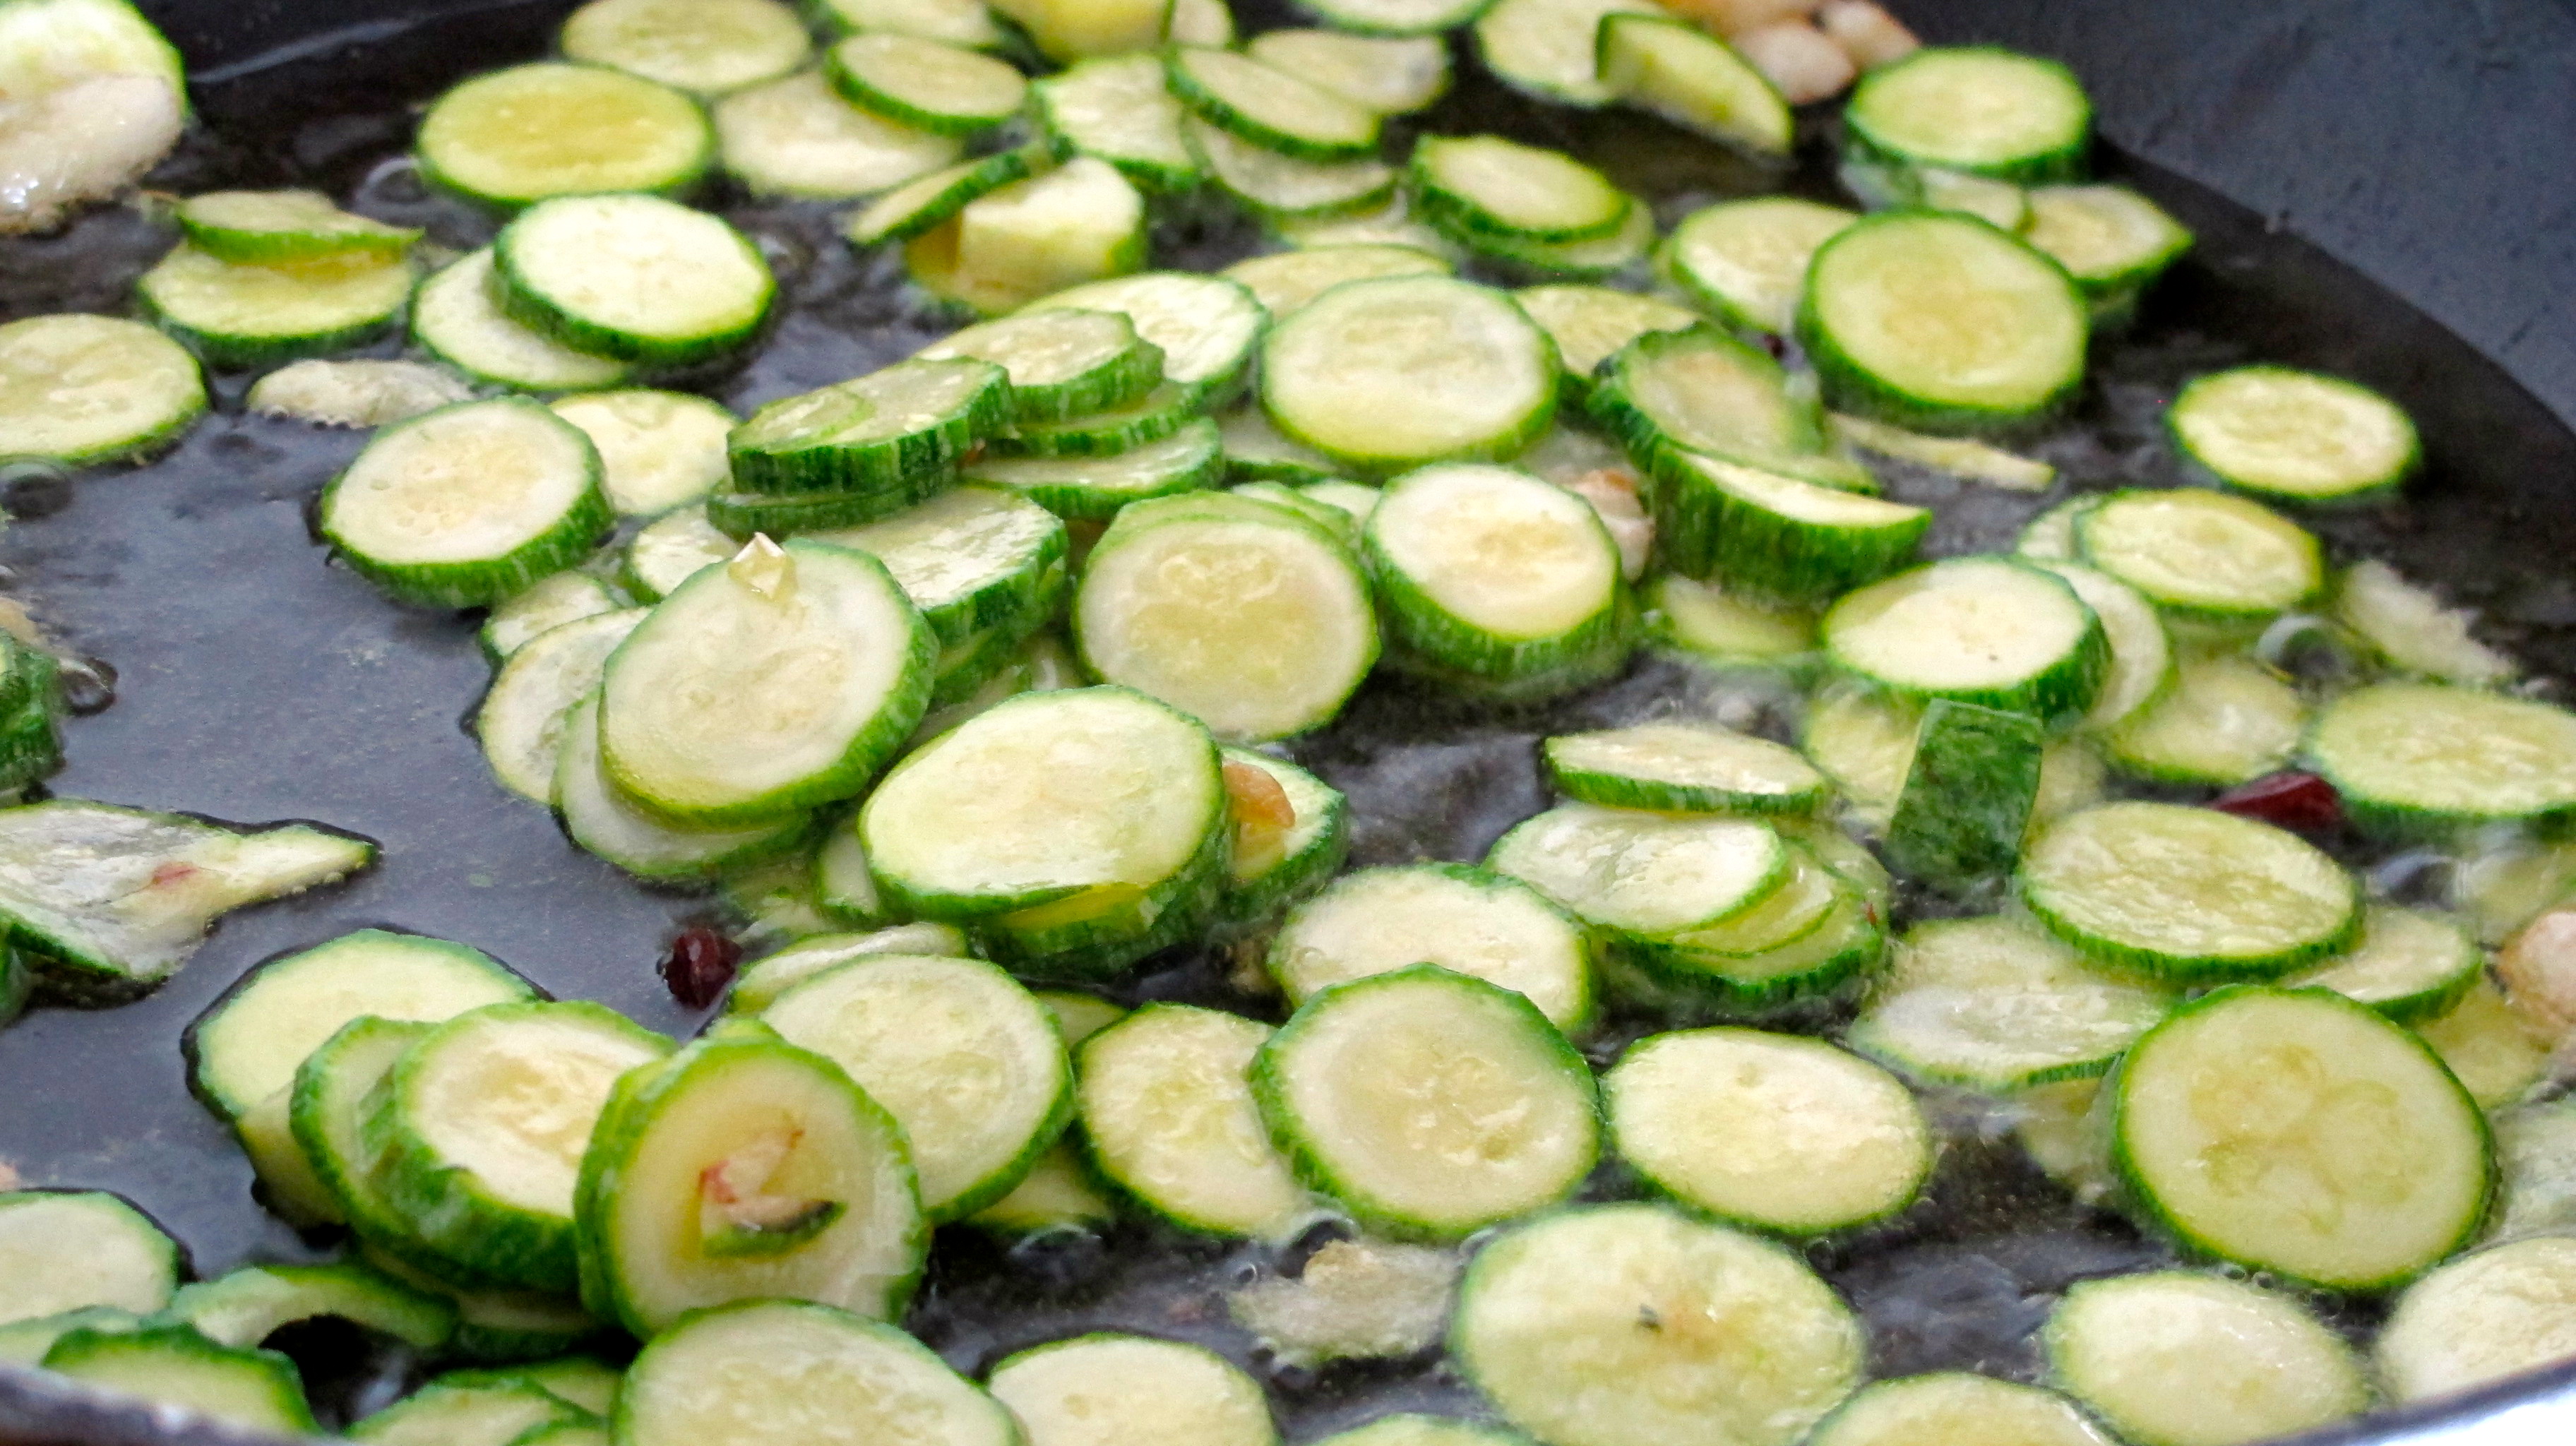 The zucchini are cooked when softened and slightly browned. 